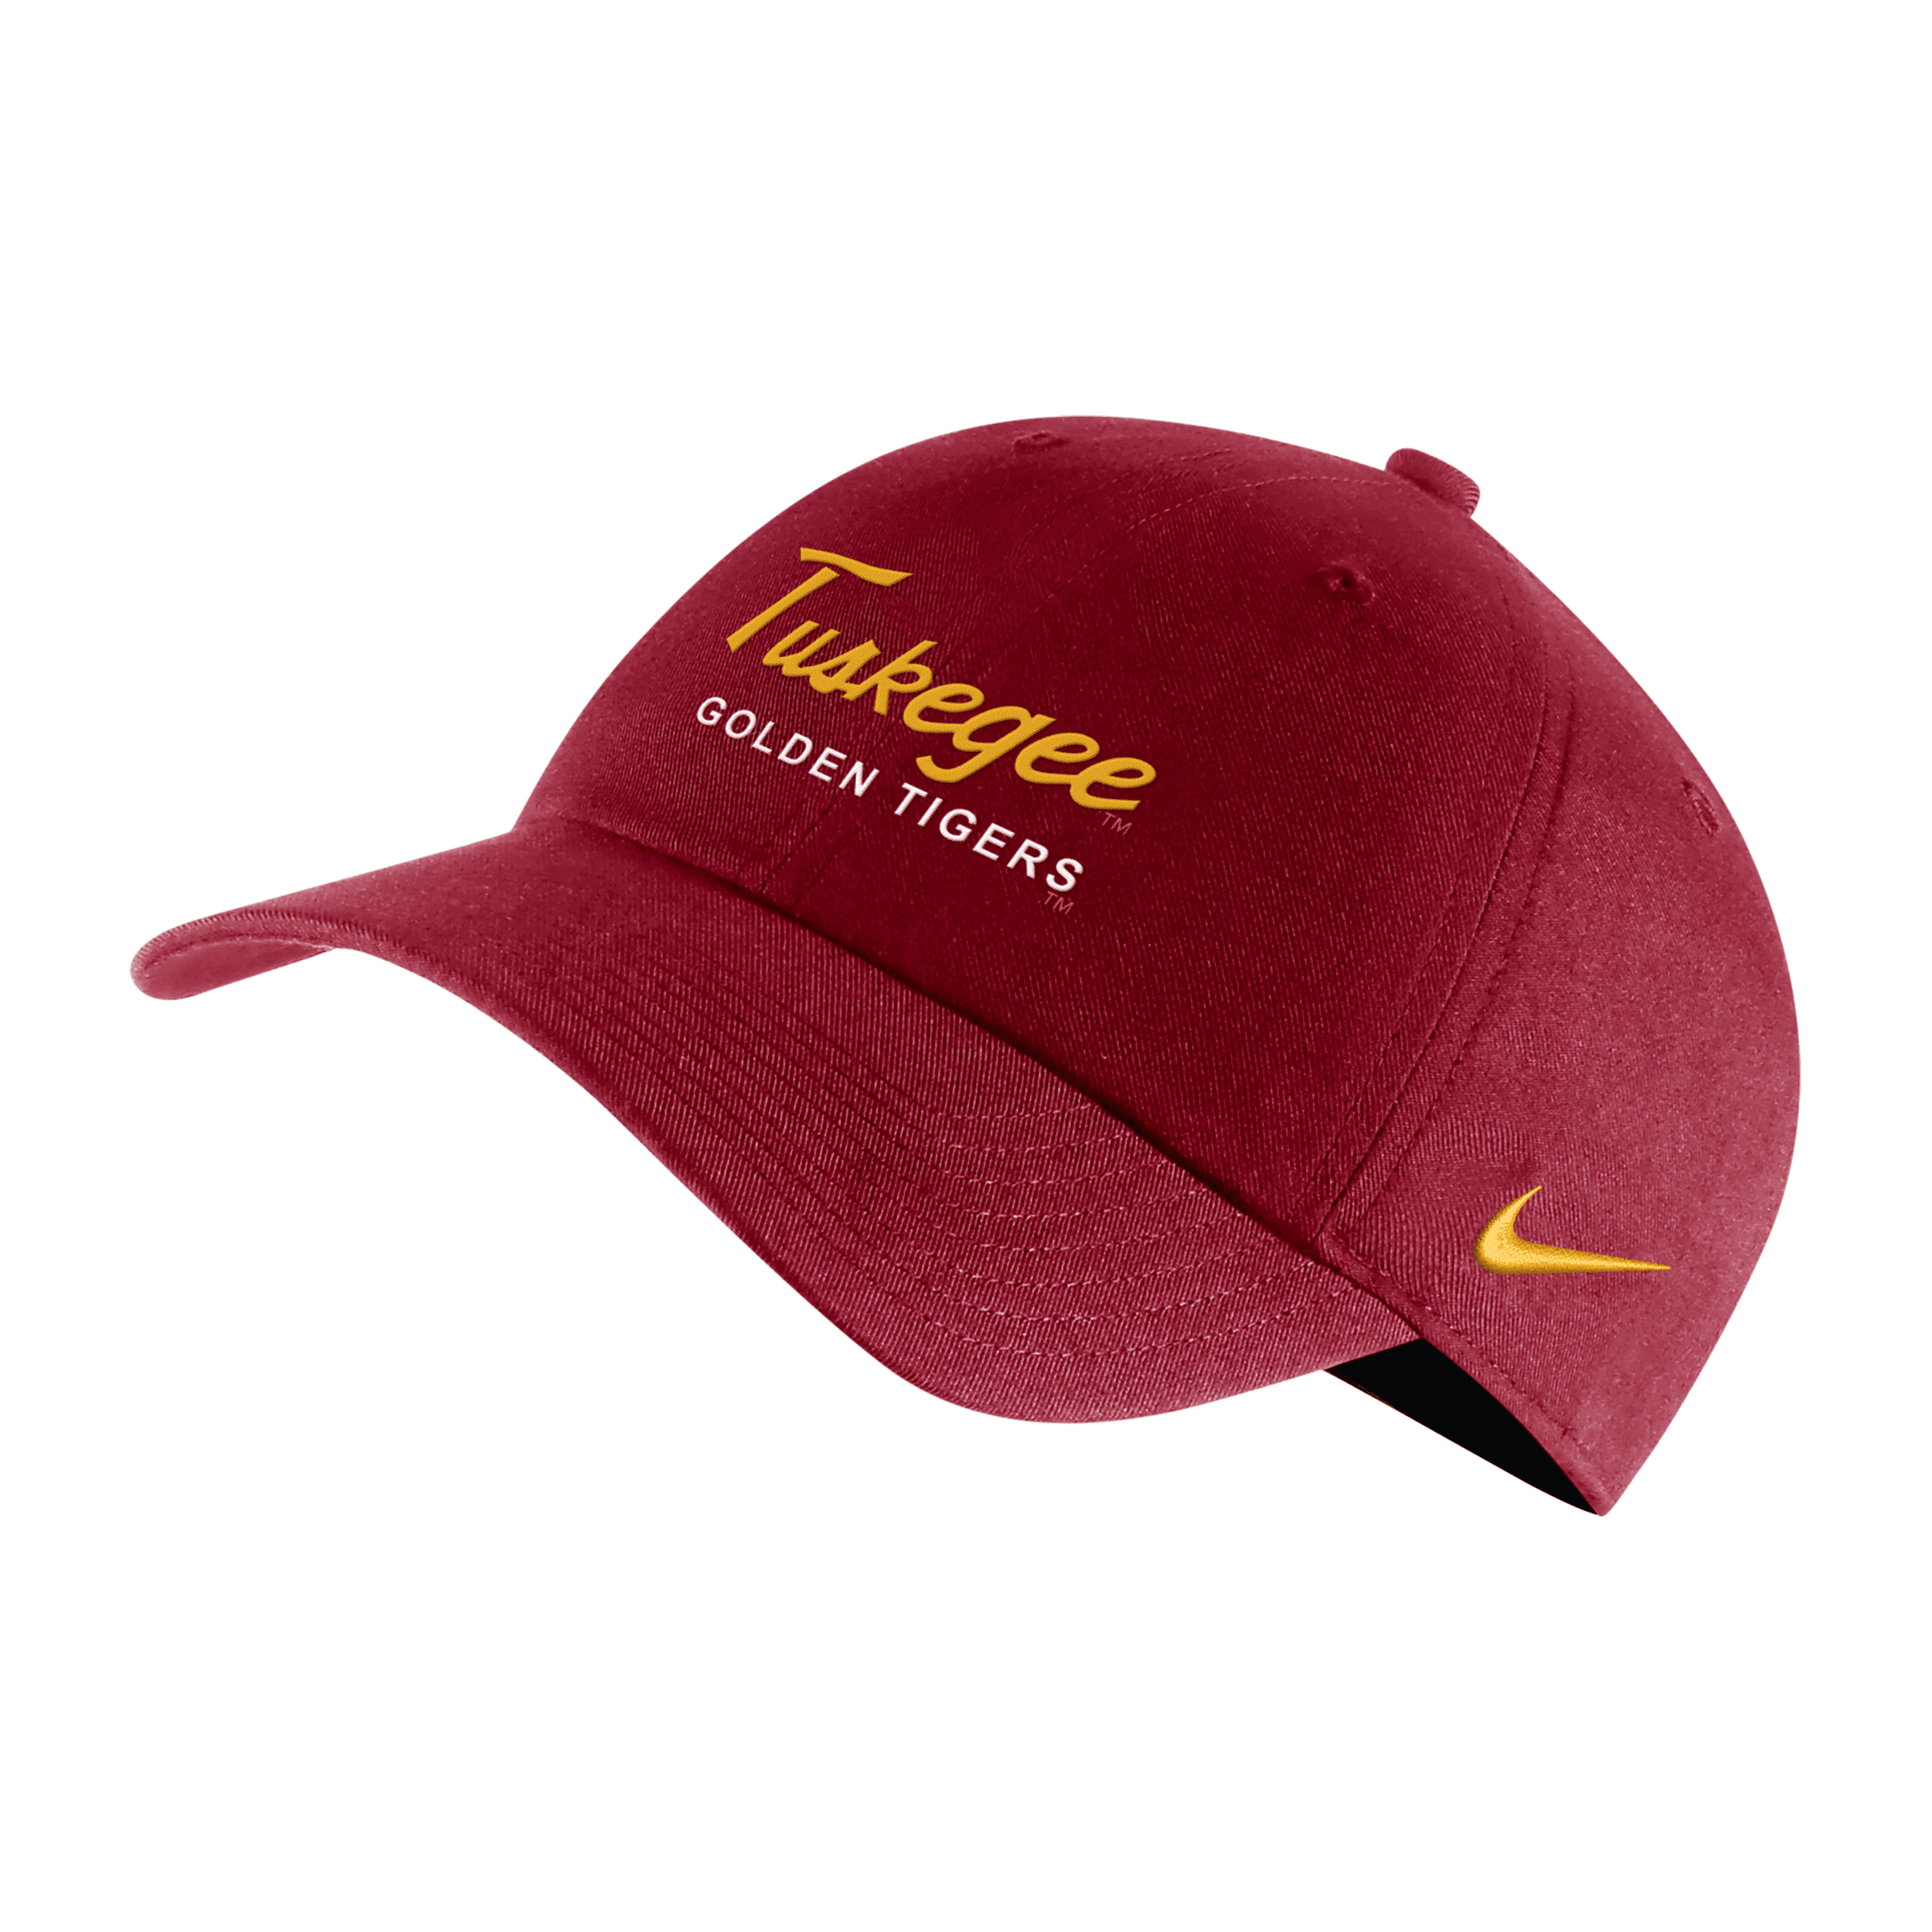 Nike Unisex College Campus 365 (tuskegee) Adjustable Hat In Red